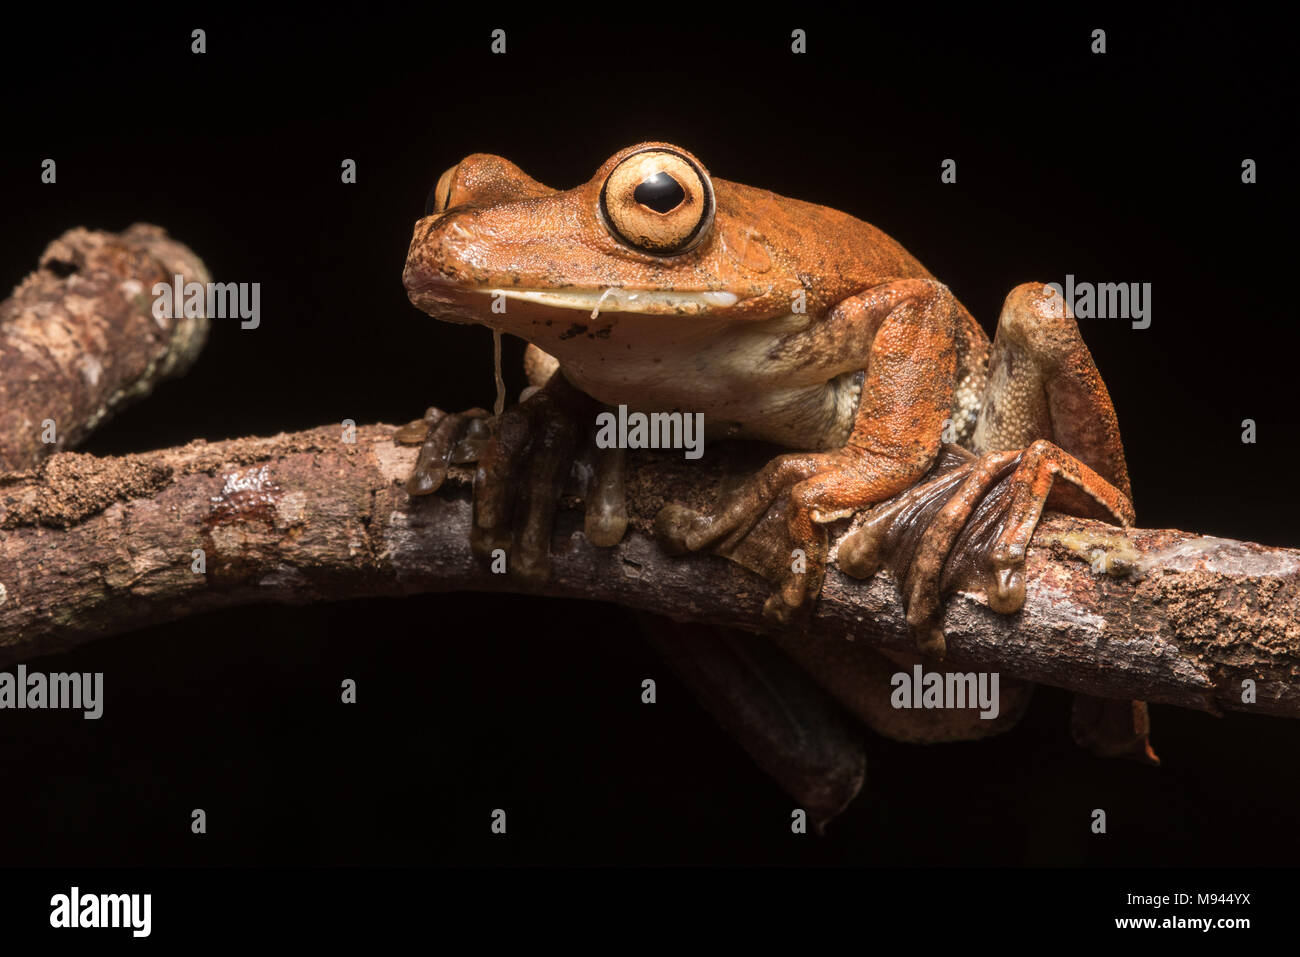 A rusty treefrog (Hypsiboas boans) from the jungle, they spend most of their time high up in the canopy & only descend late at night. Stock Photo